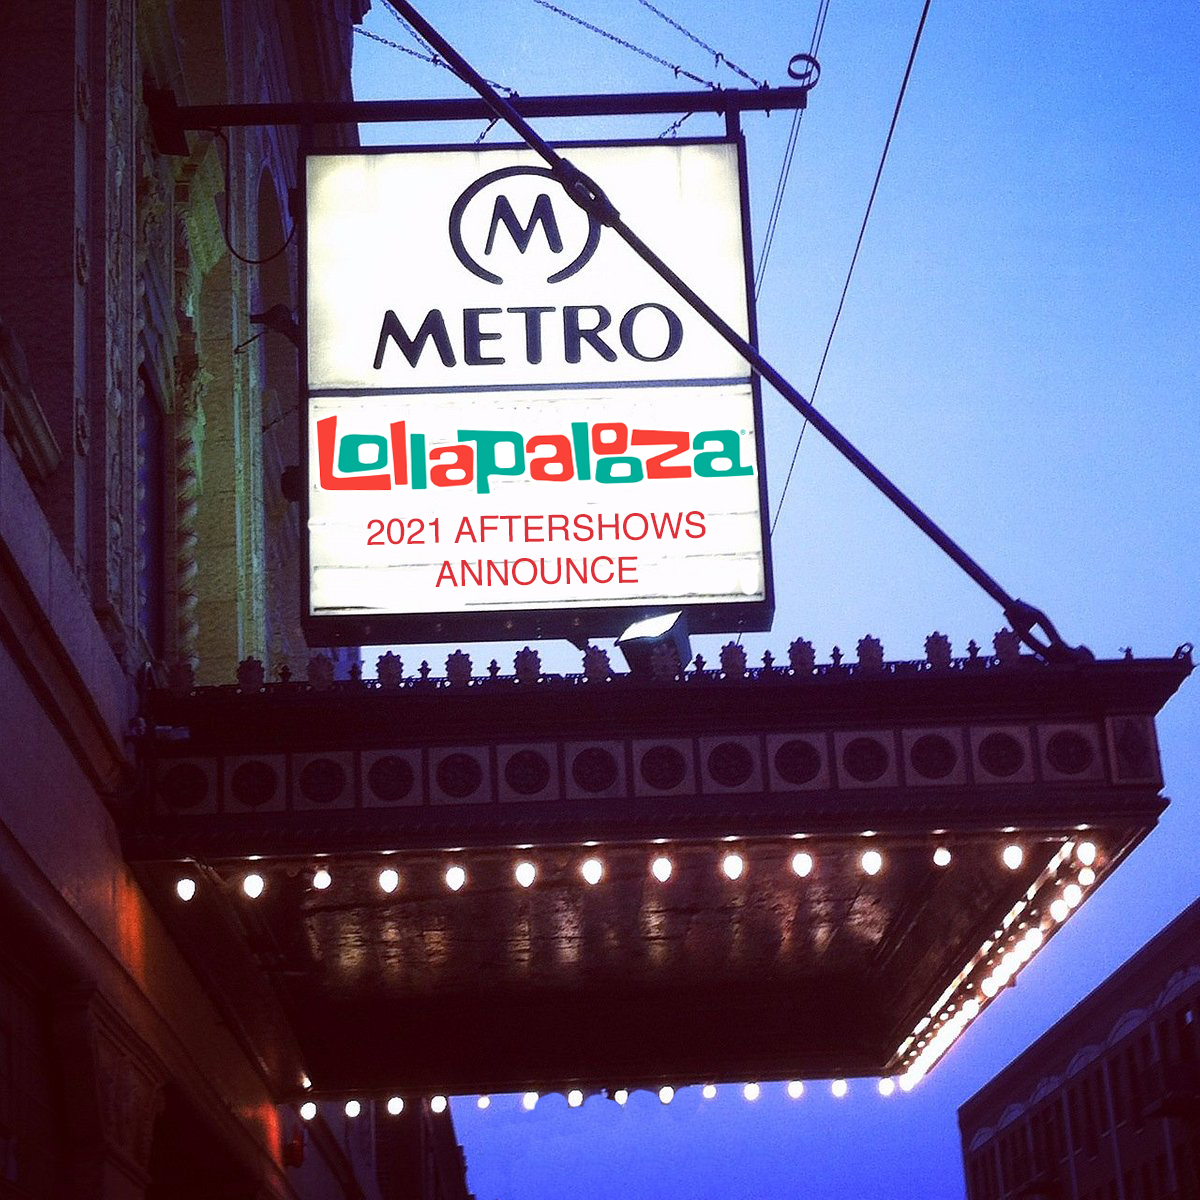 Breaking: Metro Announces First Shows in 16+ Months, Beginning with Lollapalooza Aftershows